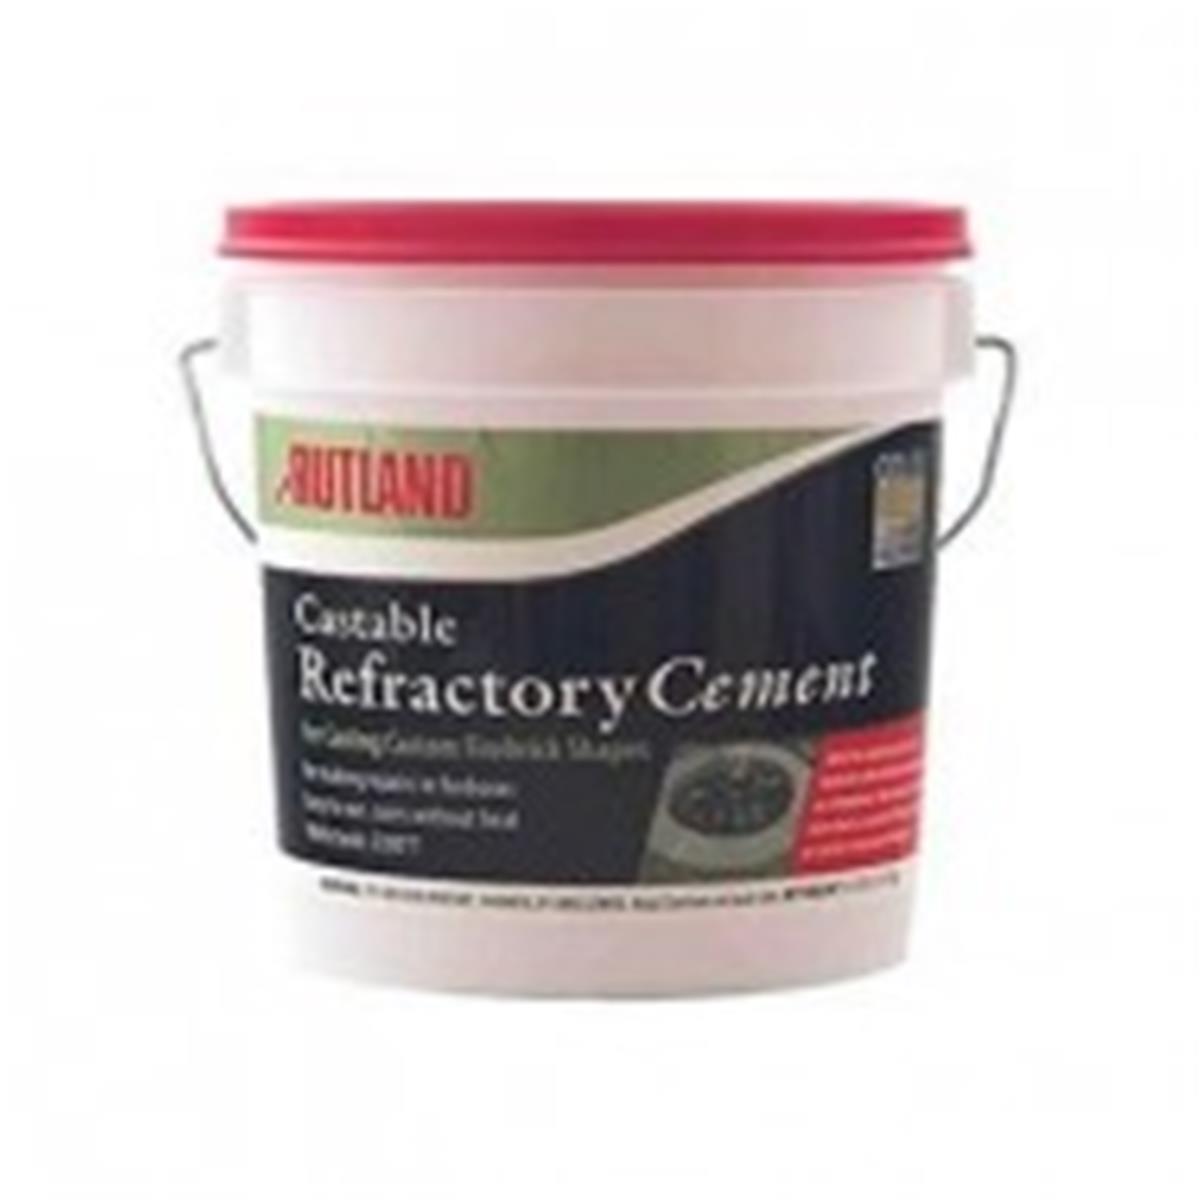 Rp600 12.5 Lbs Castable Refractory Cement